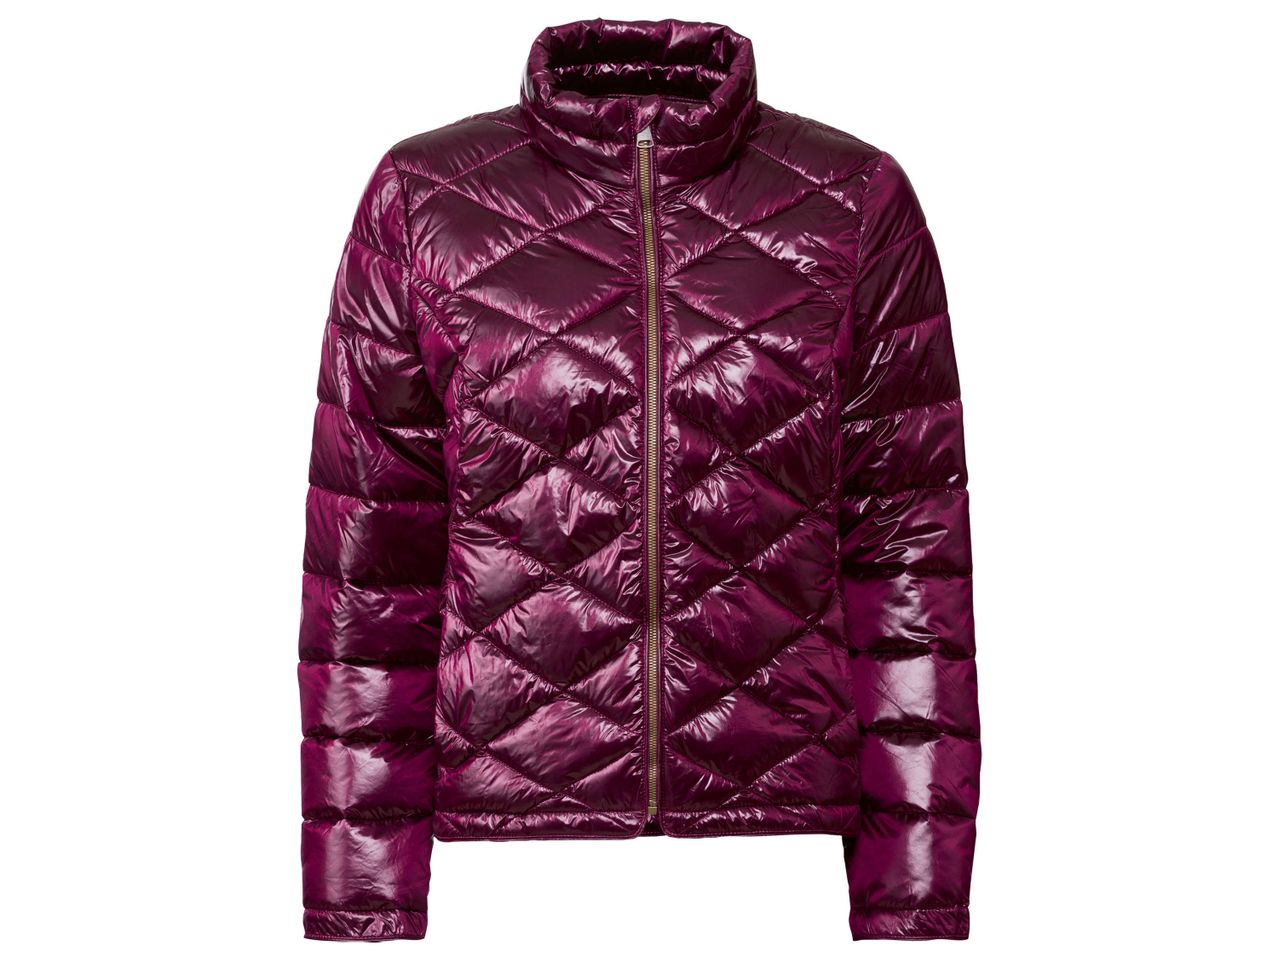 Go to full screen view: Ladies’ Lightweight Jacket - Image 4